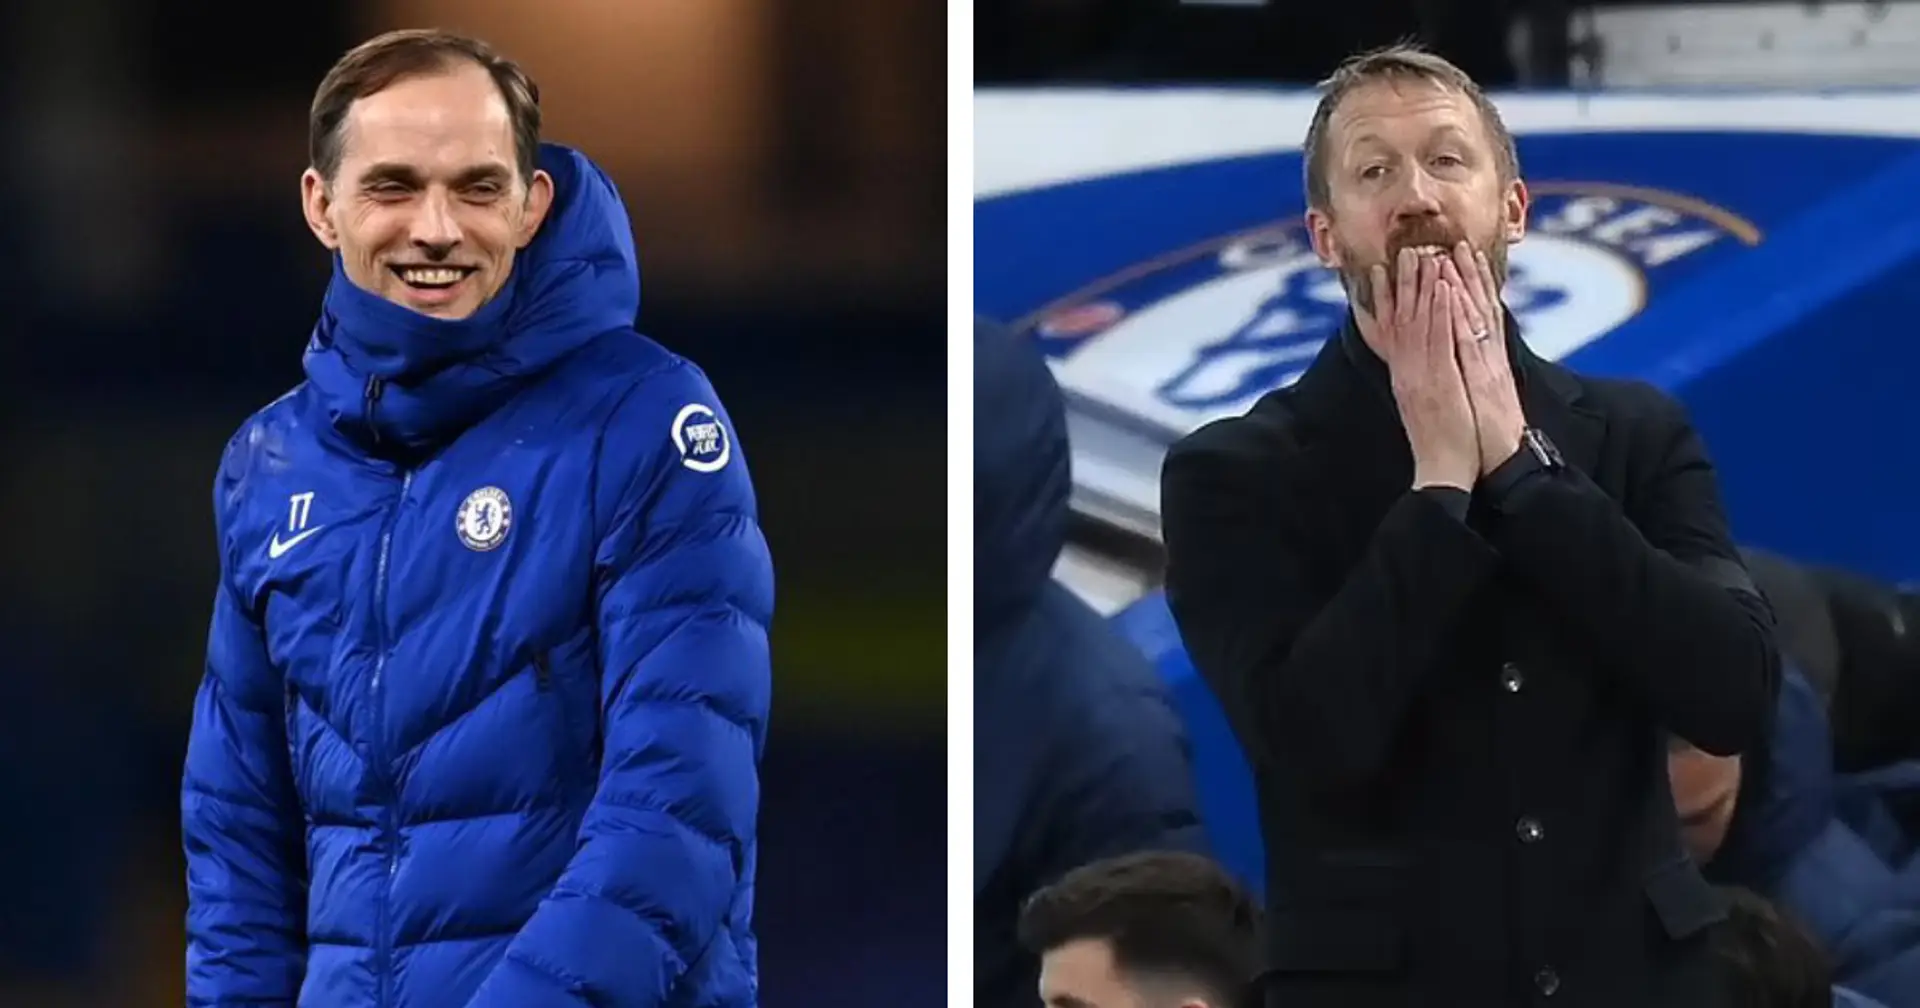 'Go and get Tuchel back': Chelsea told to get rid of Graham Potter and rehire former boss